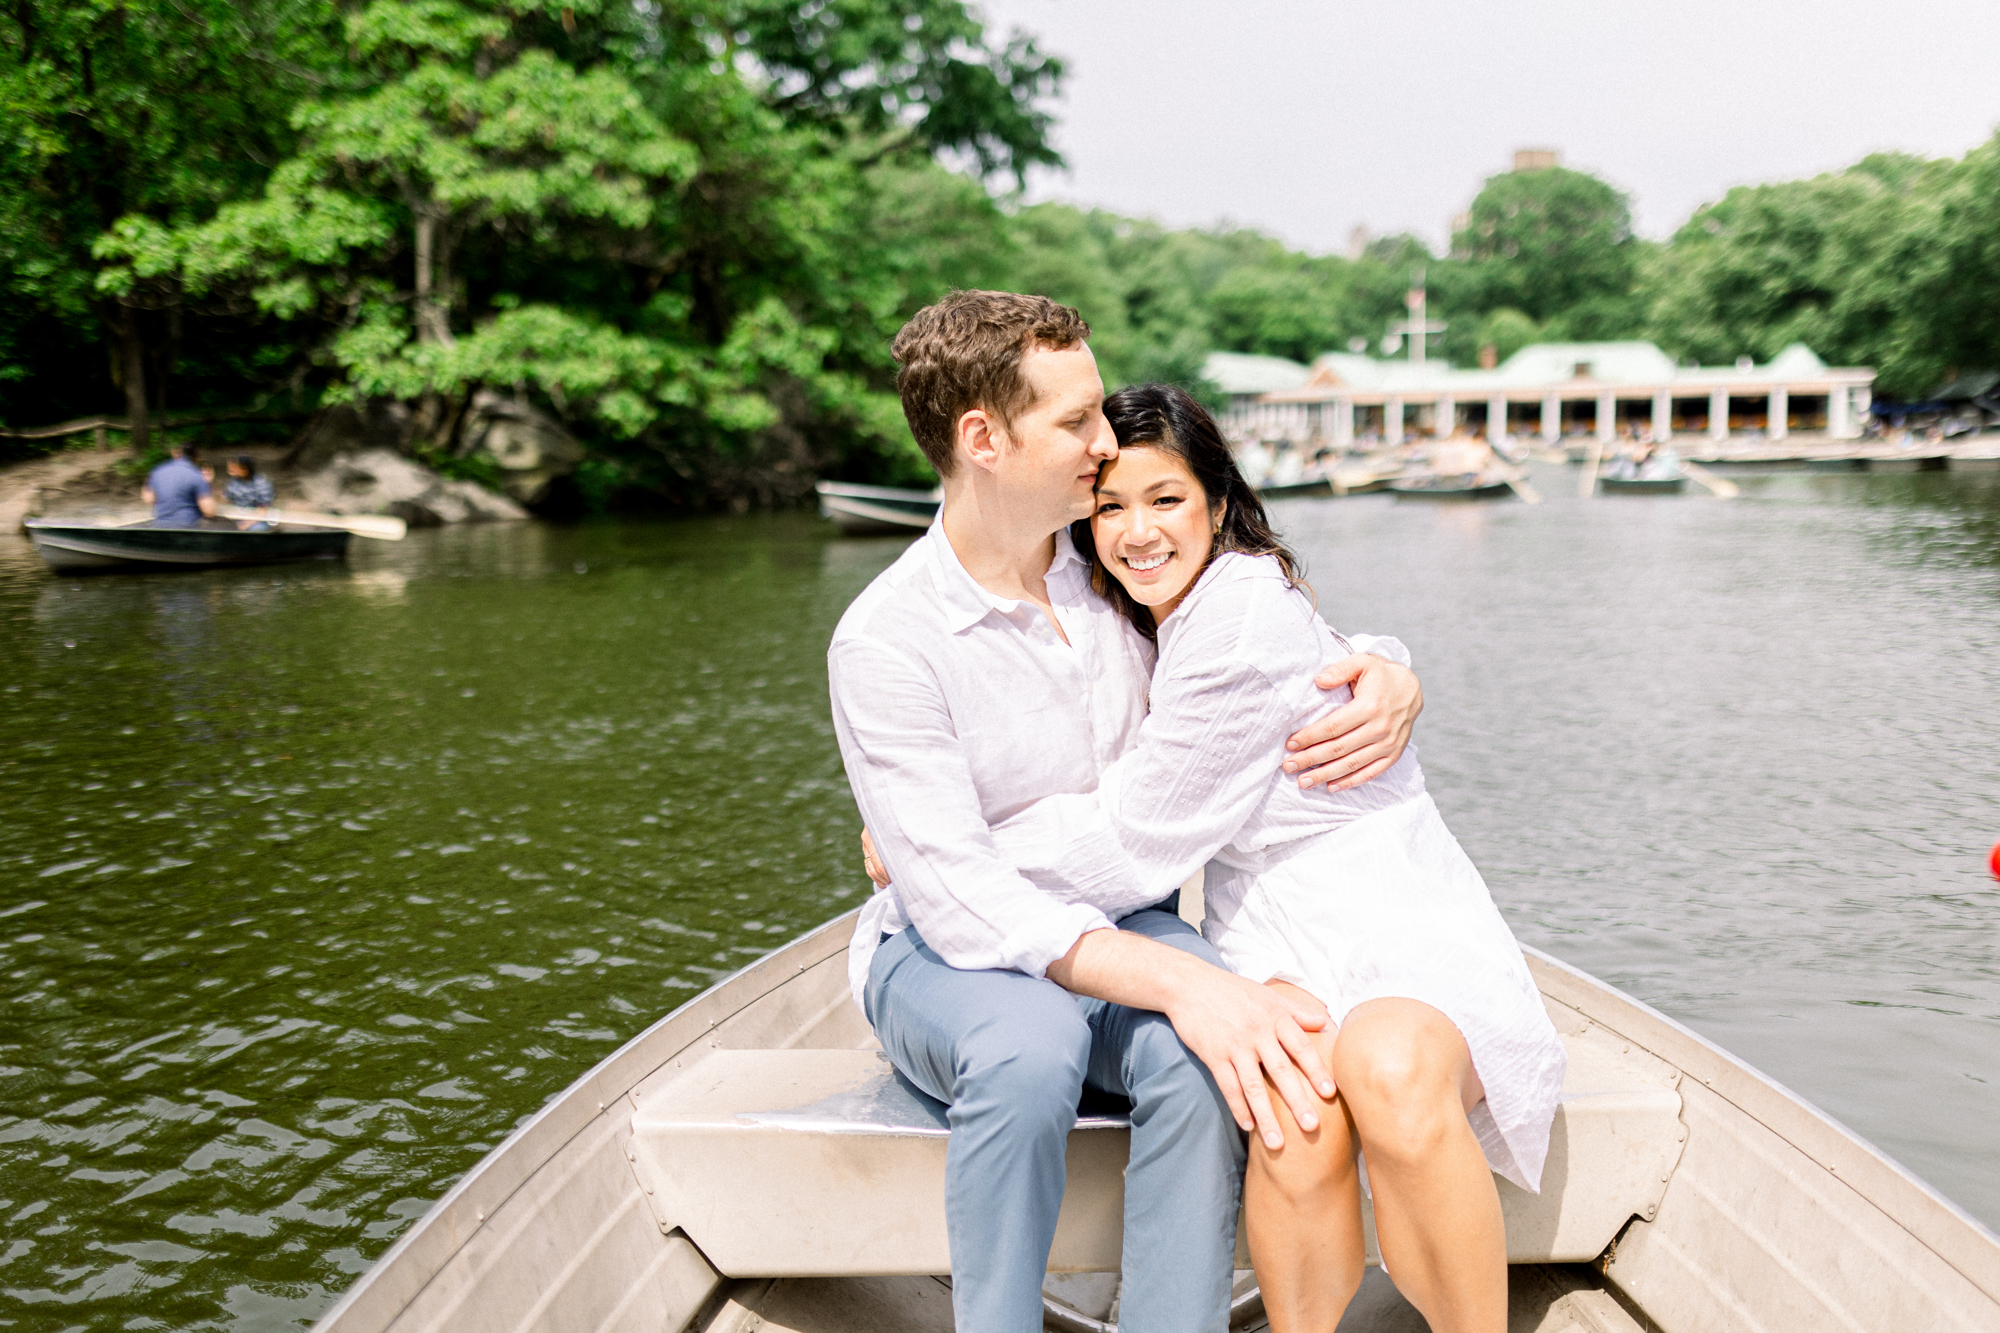 Fun Central Park Rowboat Engagement Photography in New York